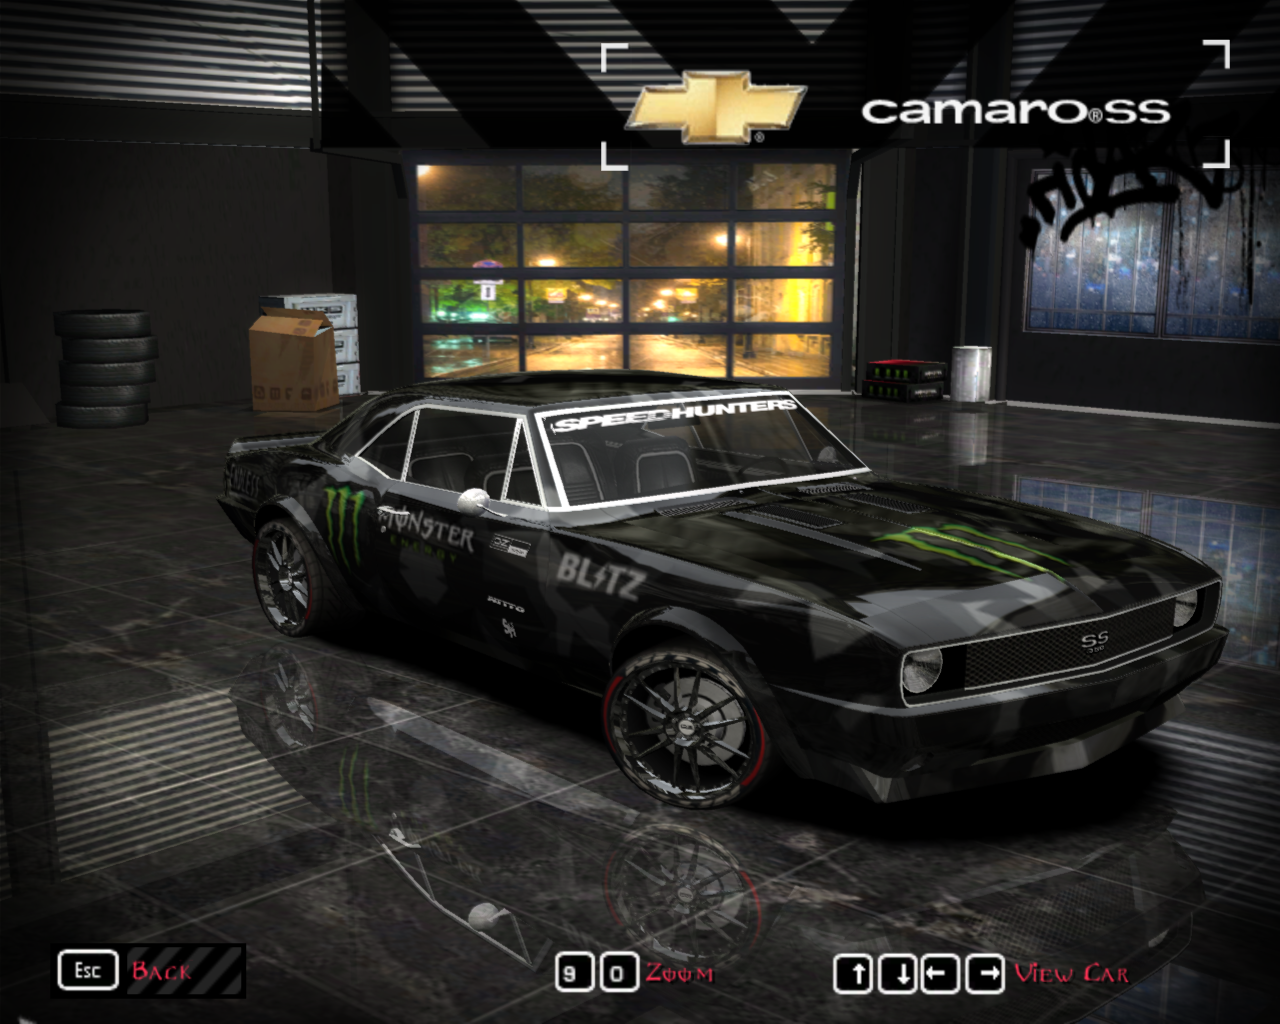 Need For Speed Most Wanted Chevrolet Camaro - Monster Energy